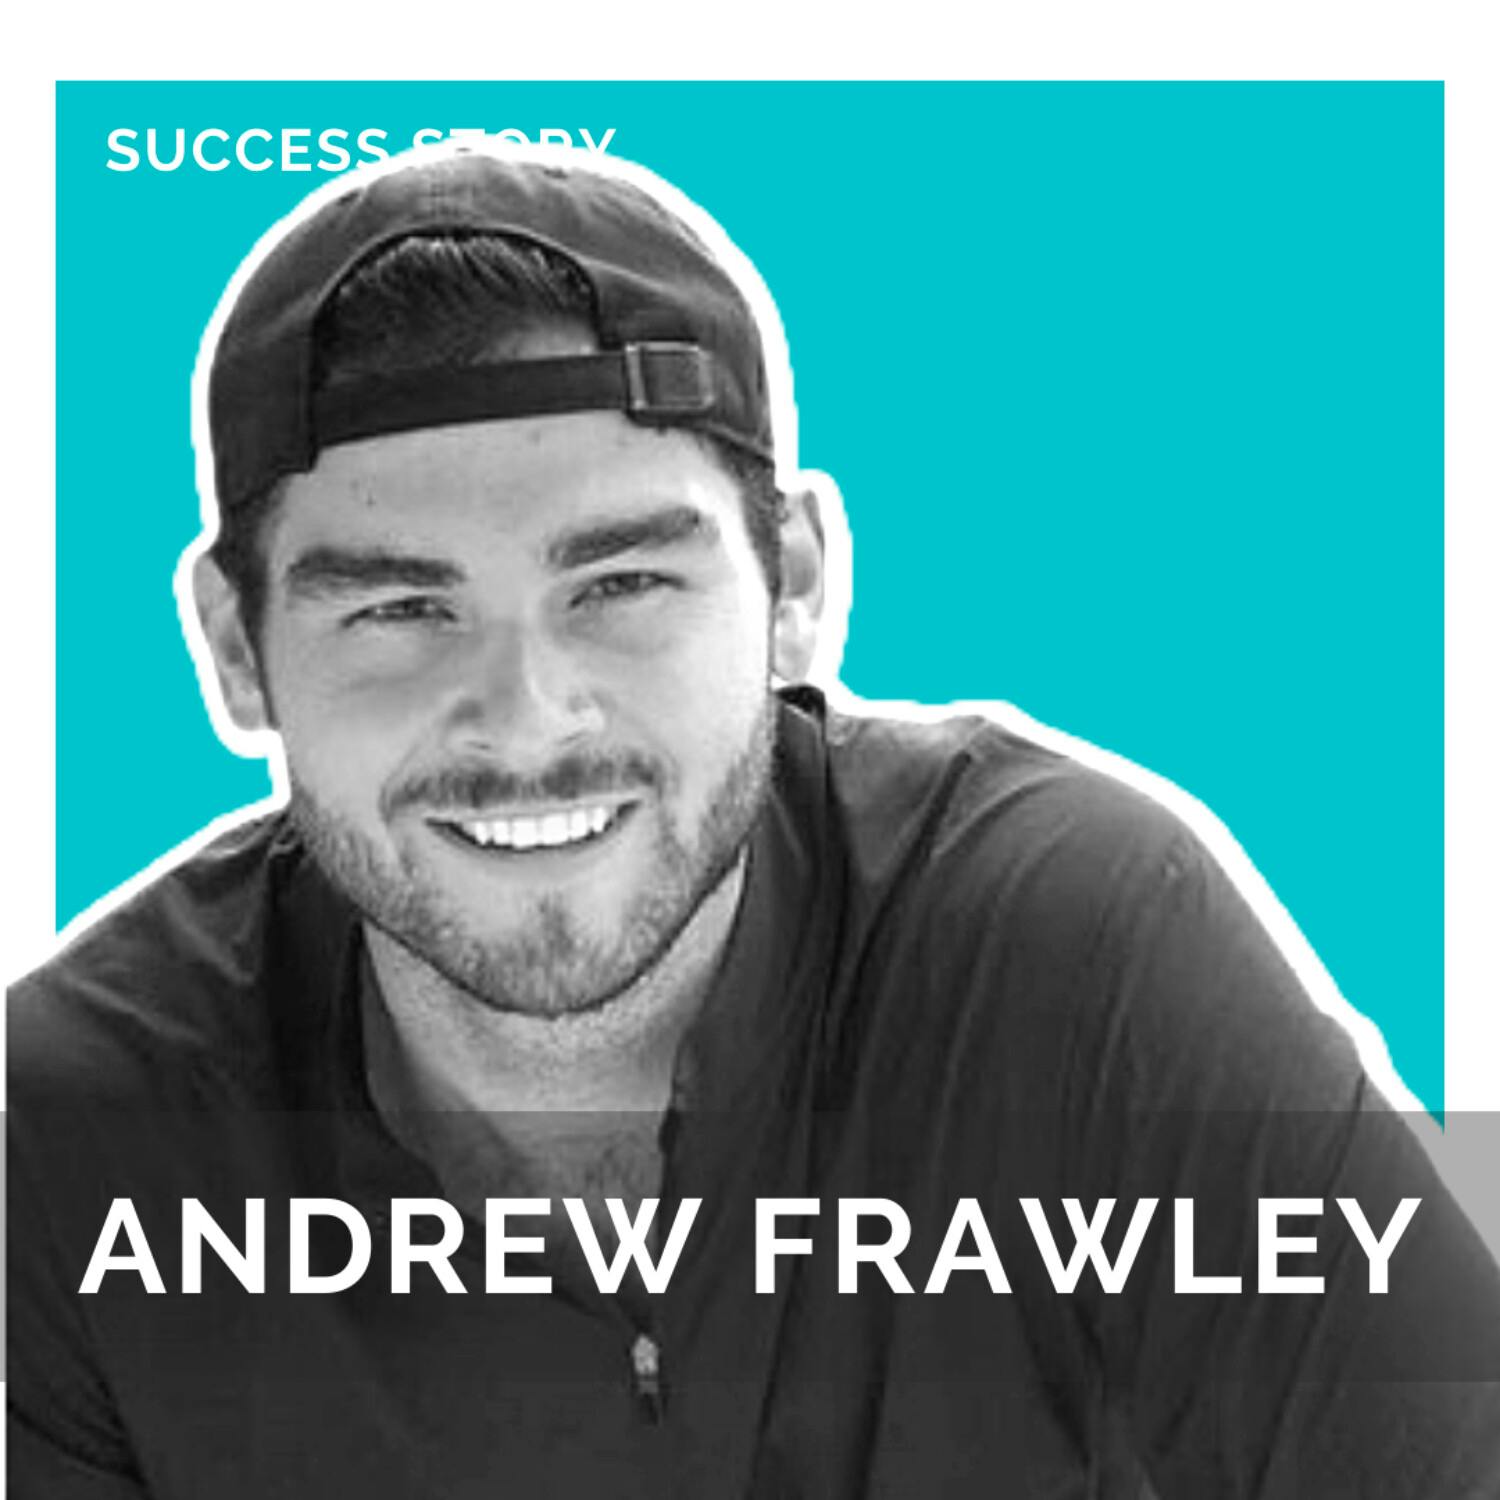 Andrew Frawley, Andrew Yang's CMO | How to Market a Presidential Campaign